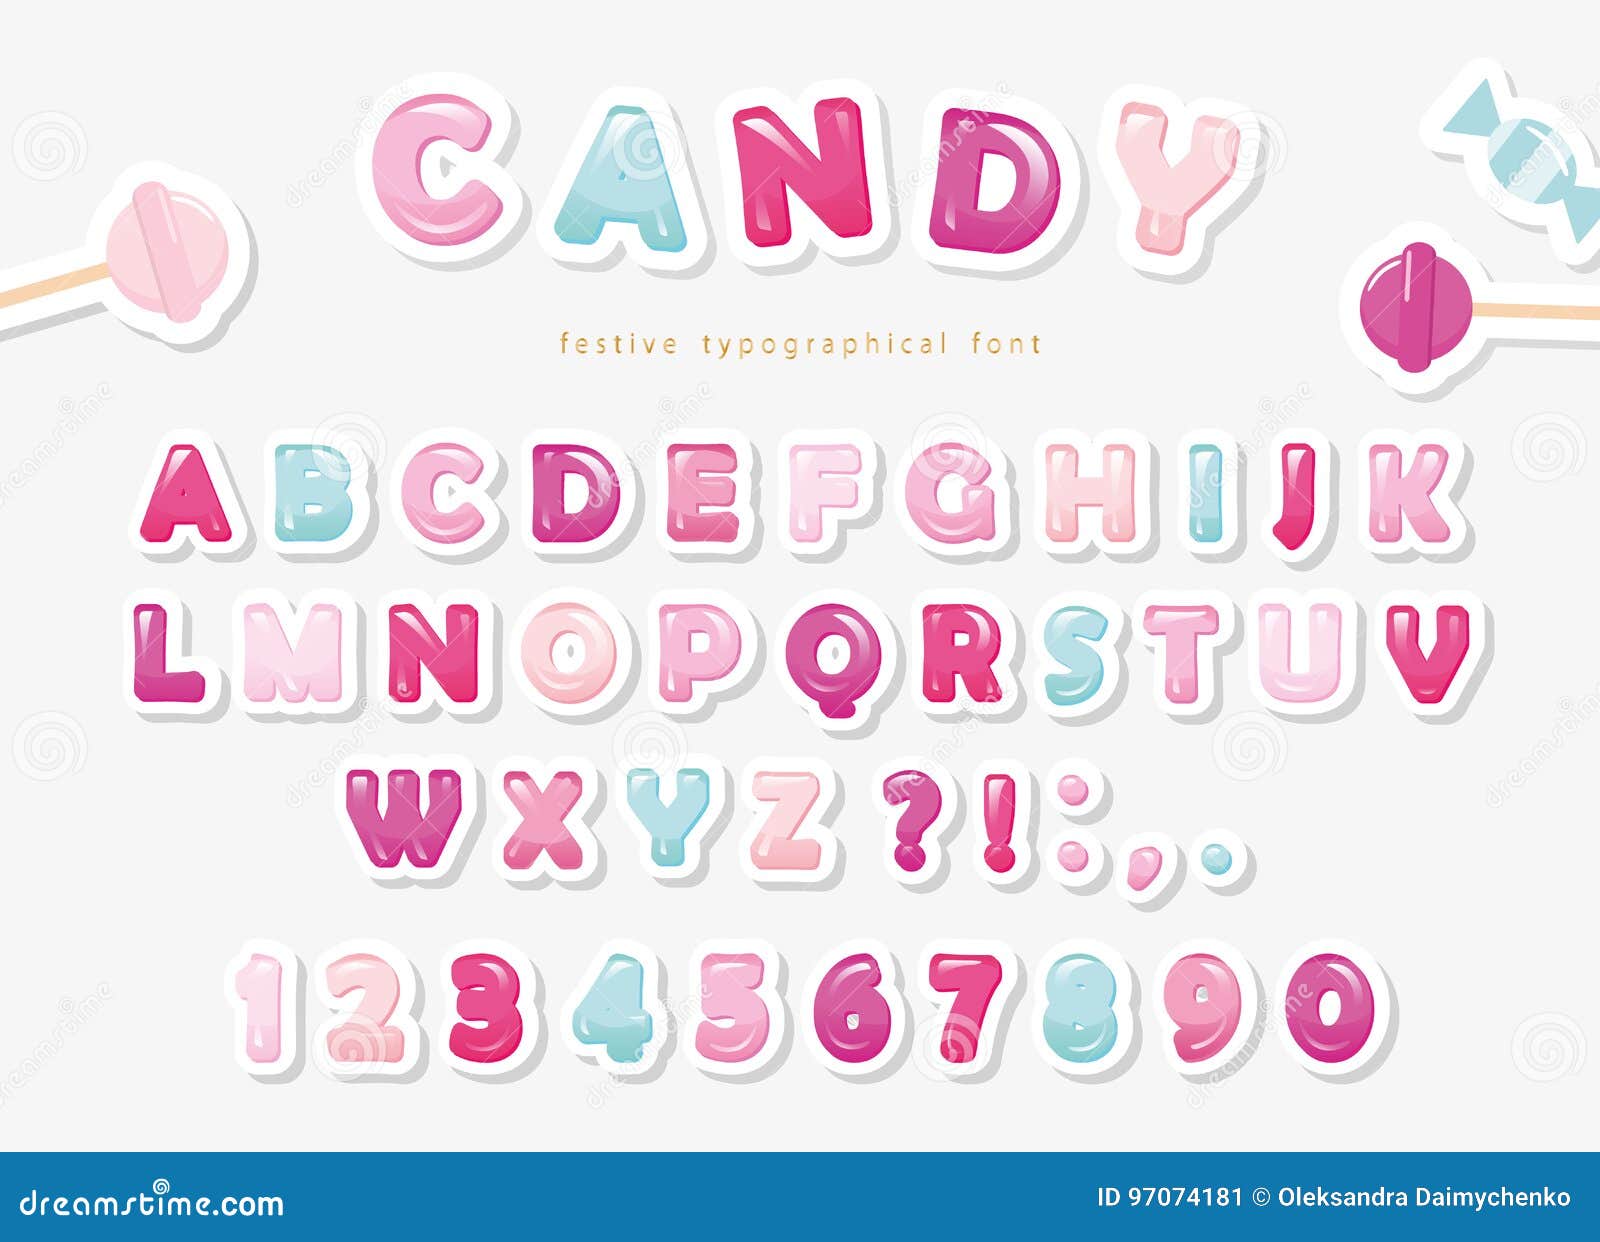 paper cut out sweet font . candy abc letters and numbers. pastel pink and blue.